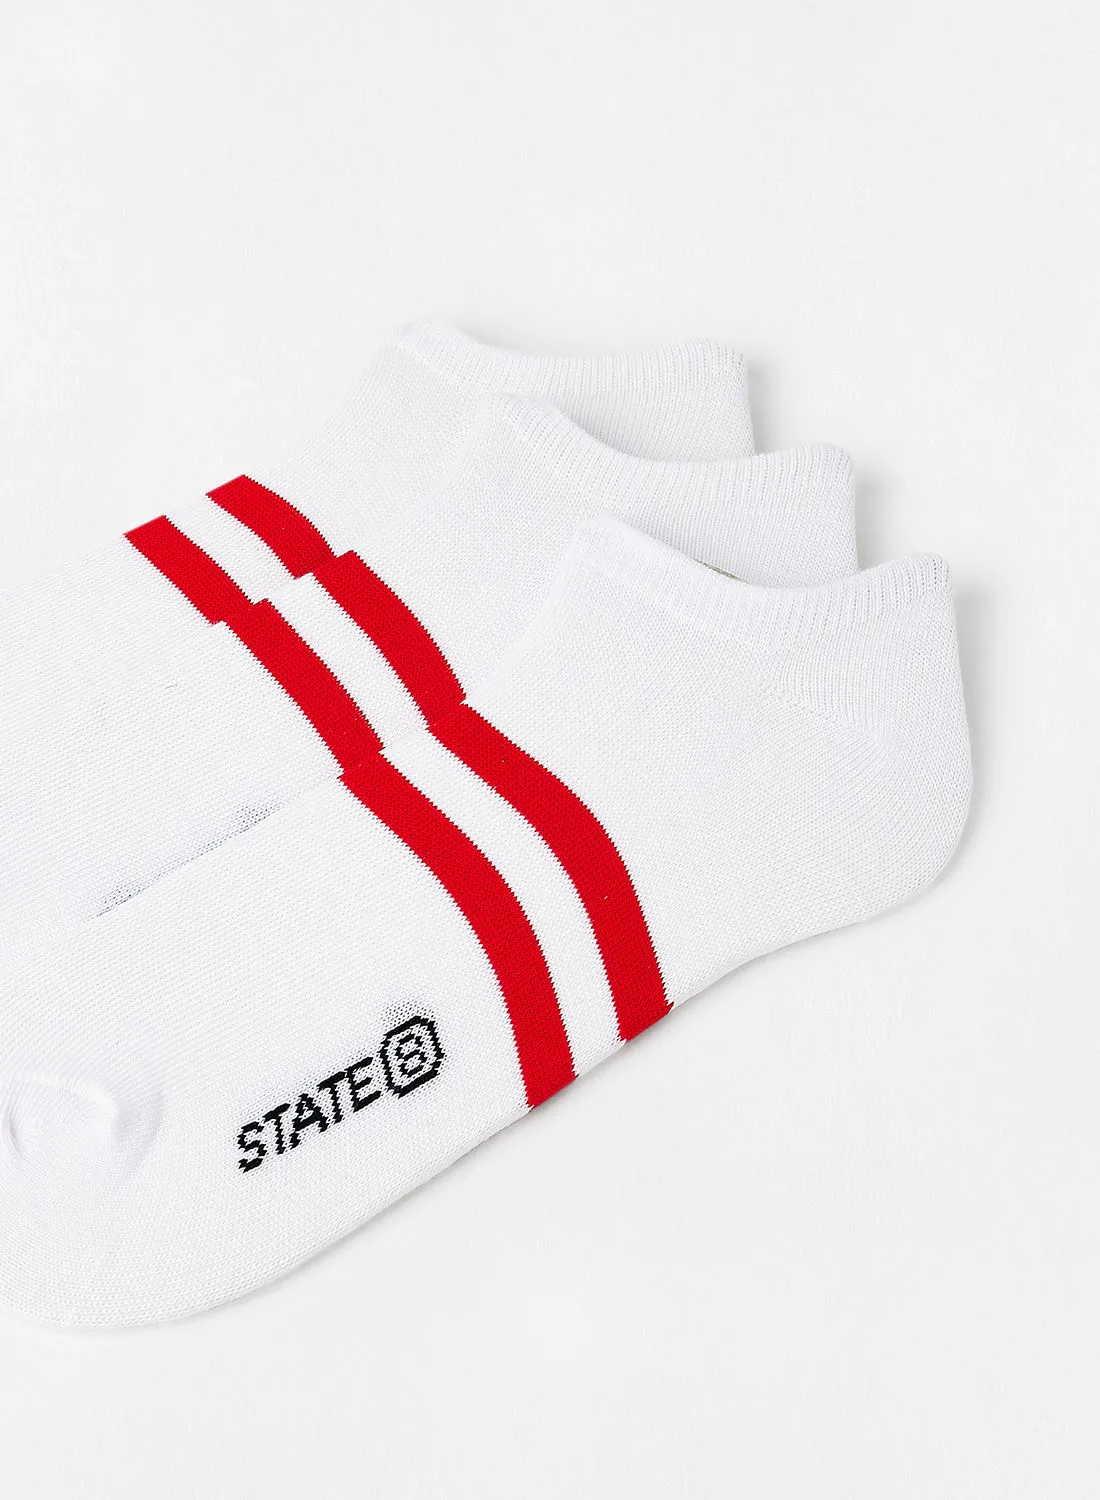 STATE 8 Contrast Ankle Socks (Pack of 3) White/Red